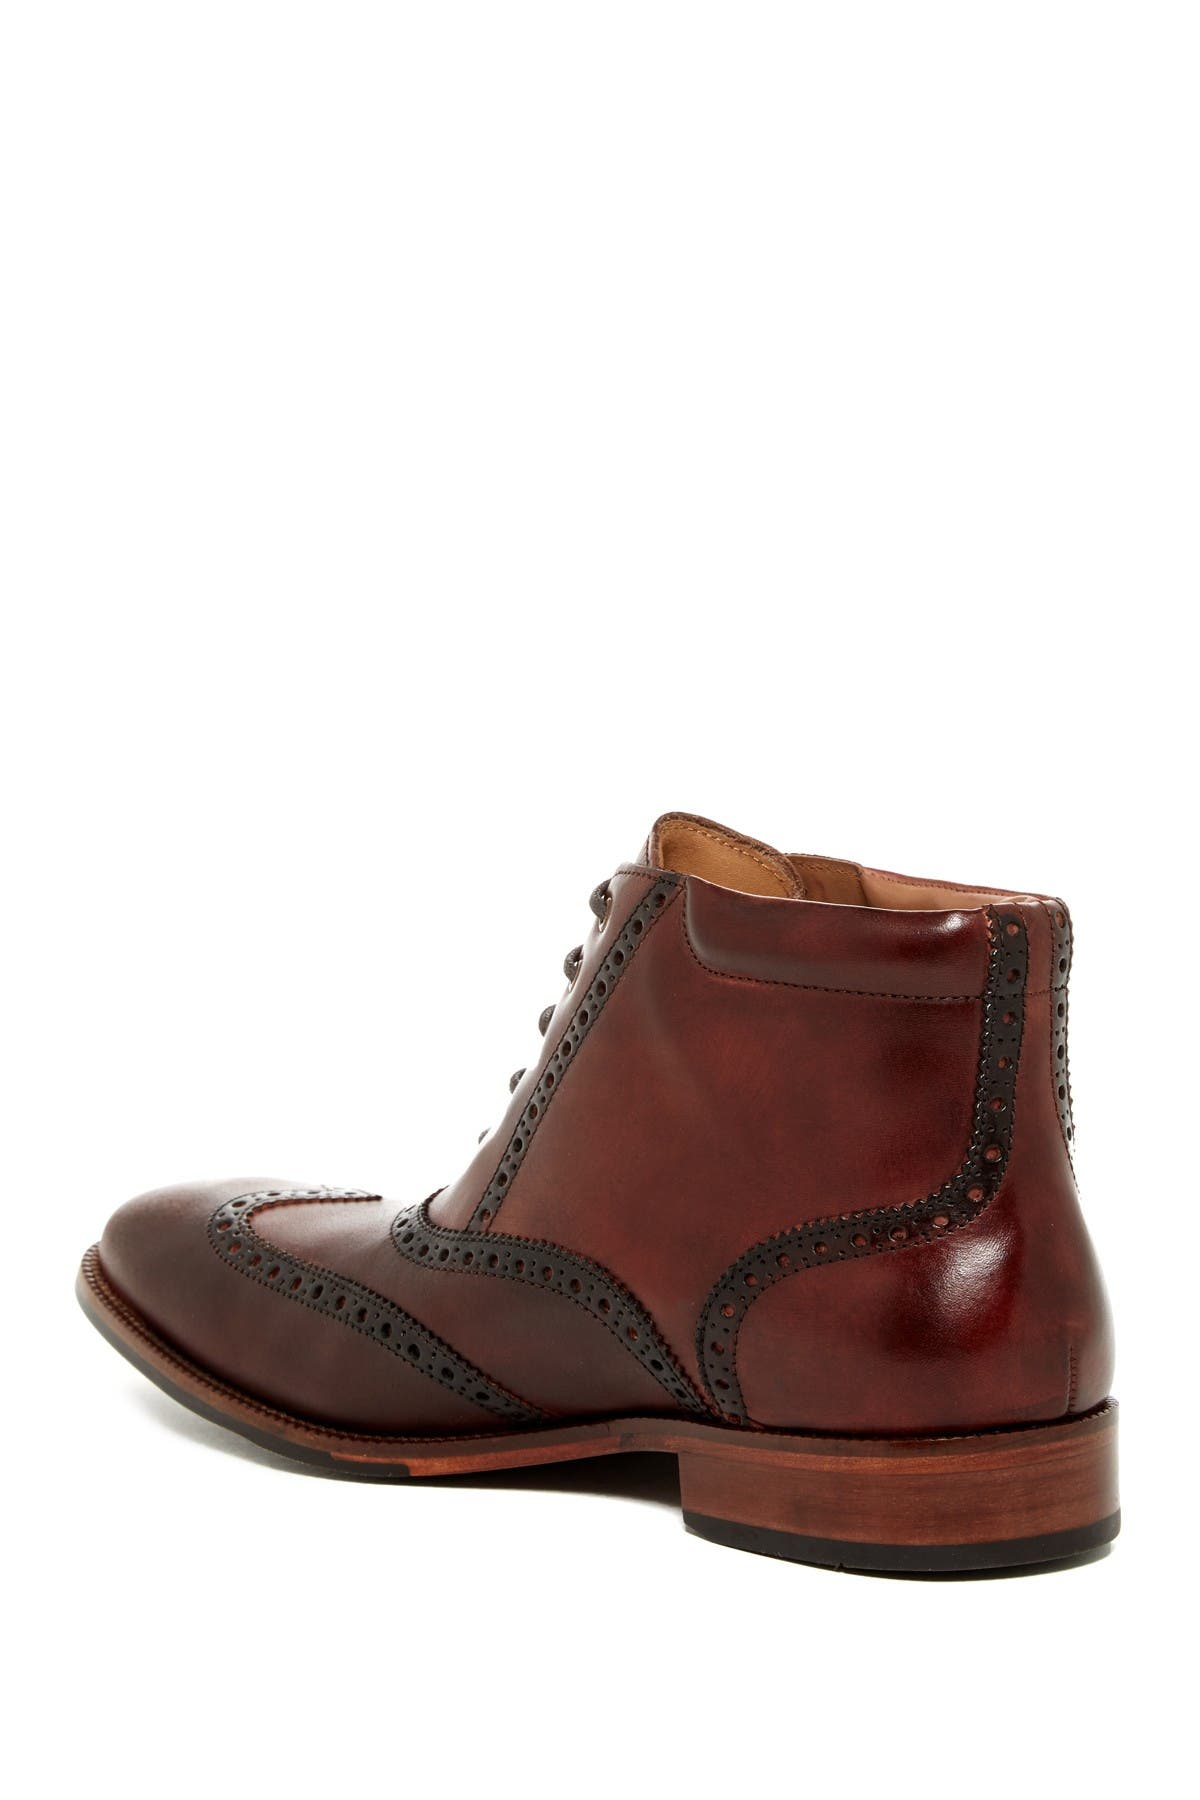 Cole Haan | Williams Wingtip Boot - Wide Width Available ...